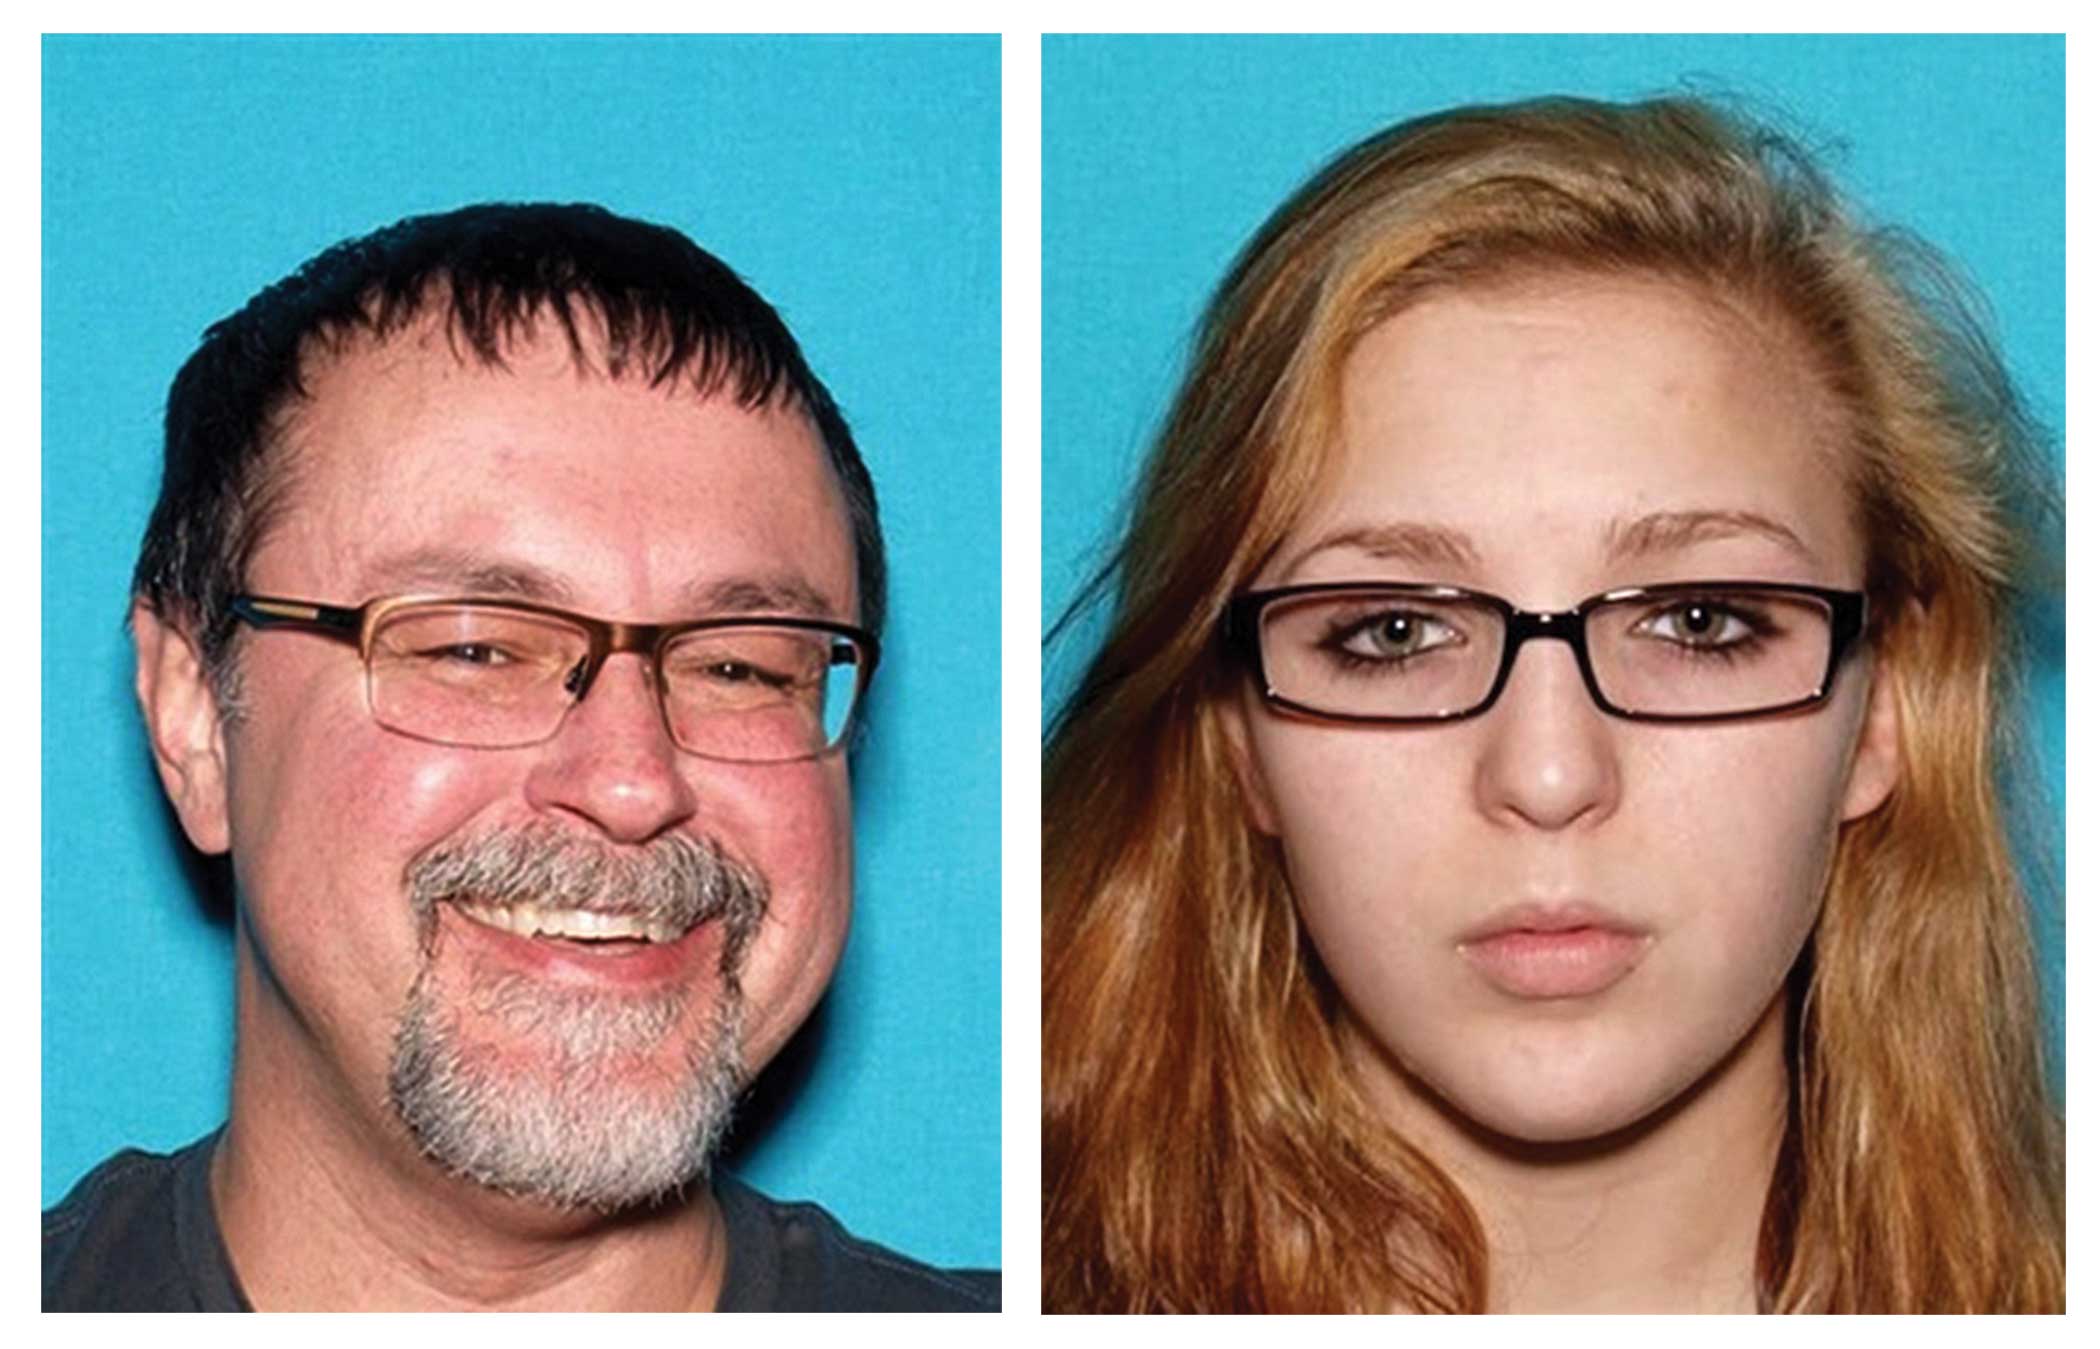 Tad Cummins, left, and Elizabeth Thomas. The Tennessee Bureau of Investigation said it remains "extremely concerned" about the well-being of Thomas, who was last seen on March 13, 2017, in Columbia, Tenn. (Tennessee Bureau of Investigations/AP)